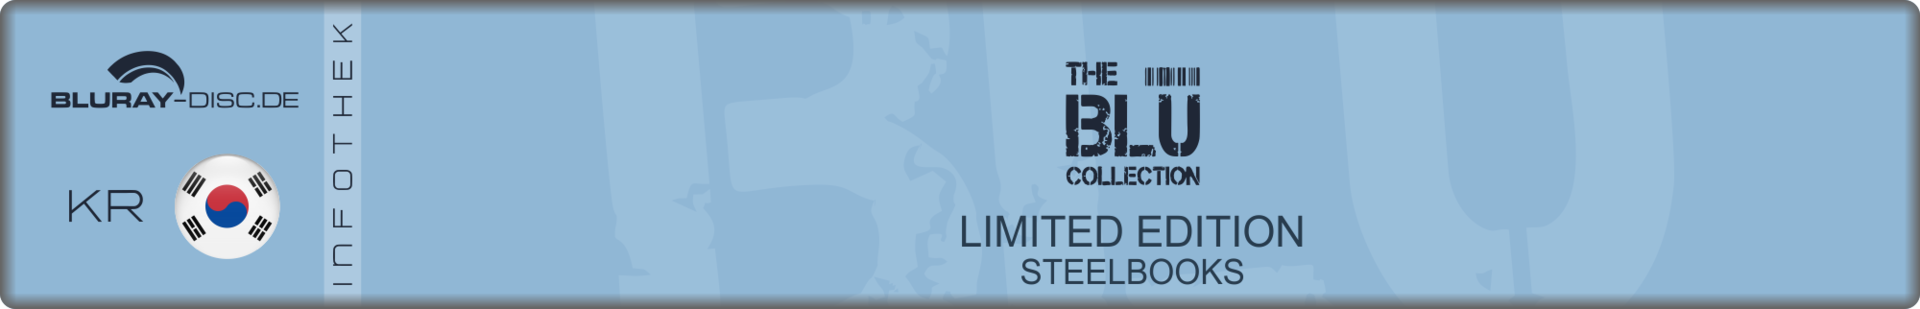 KR_The_Blu_Limited_Edition_Steelbooks.png